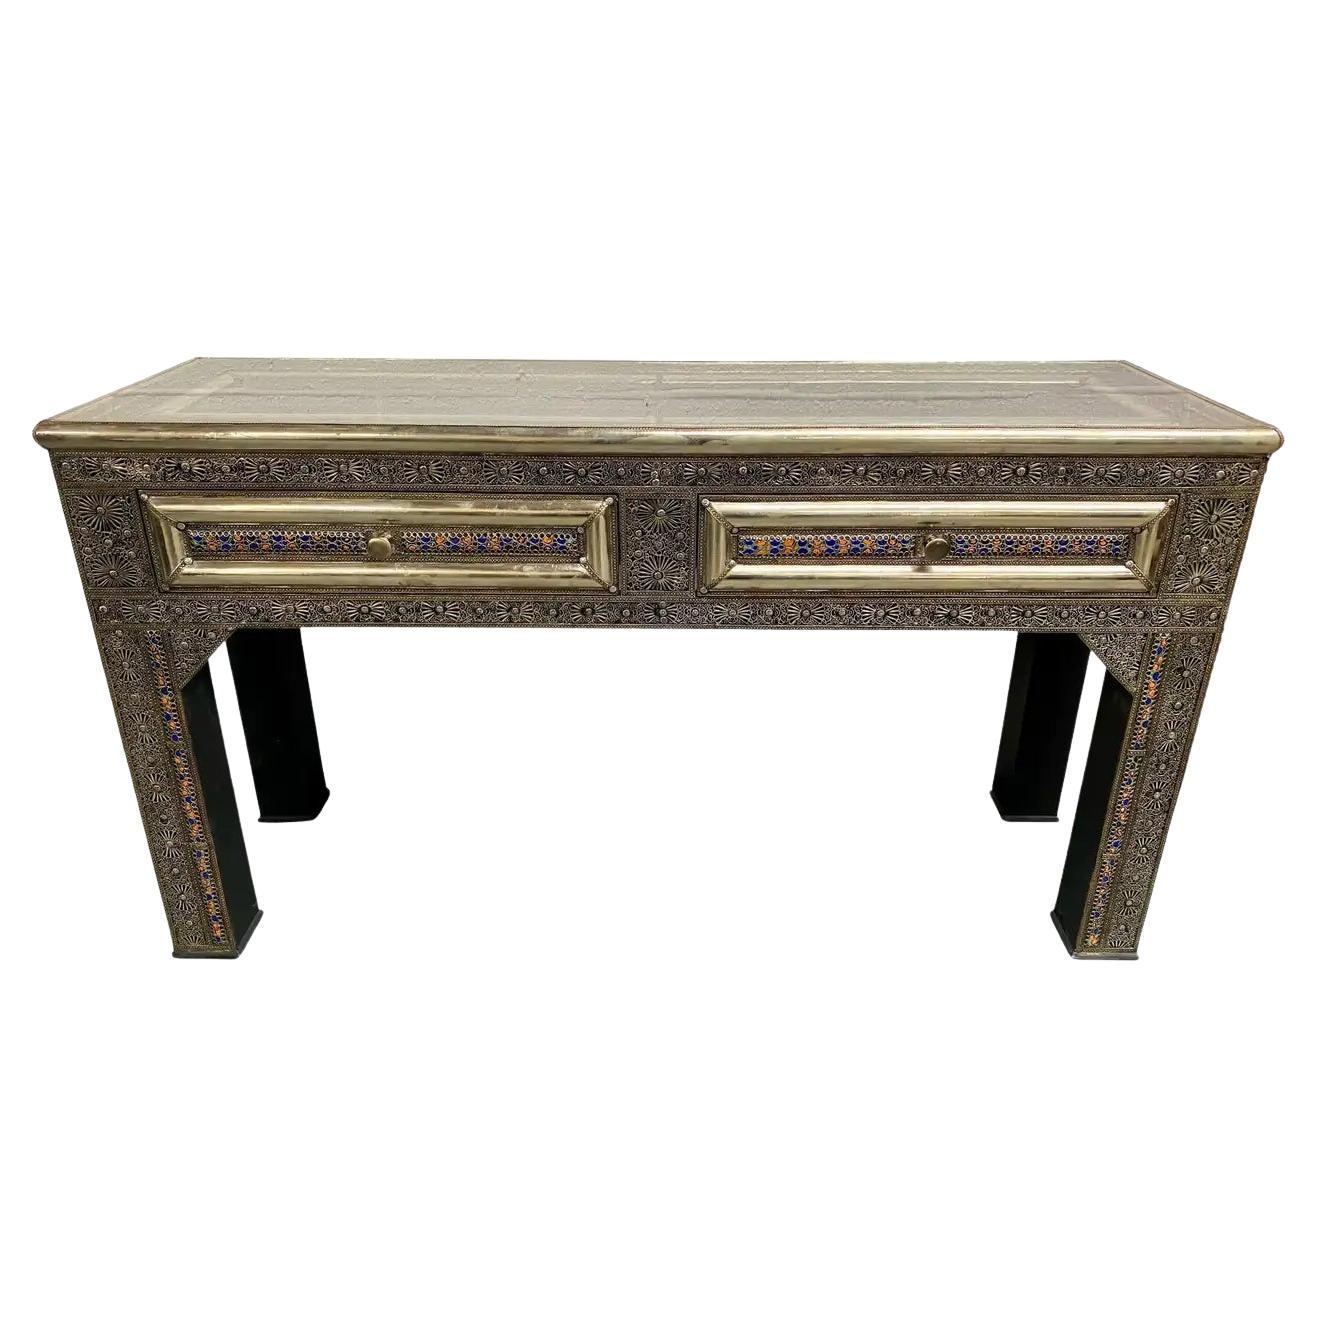 Hollywood Regency Style Silver Console, Desk or Table in Filigree Design